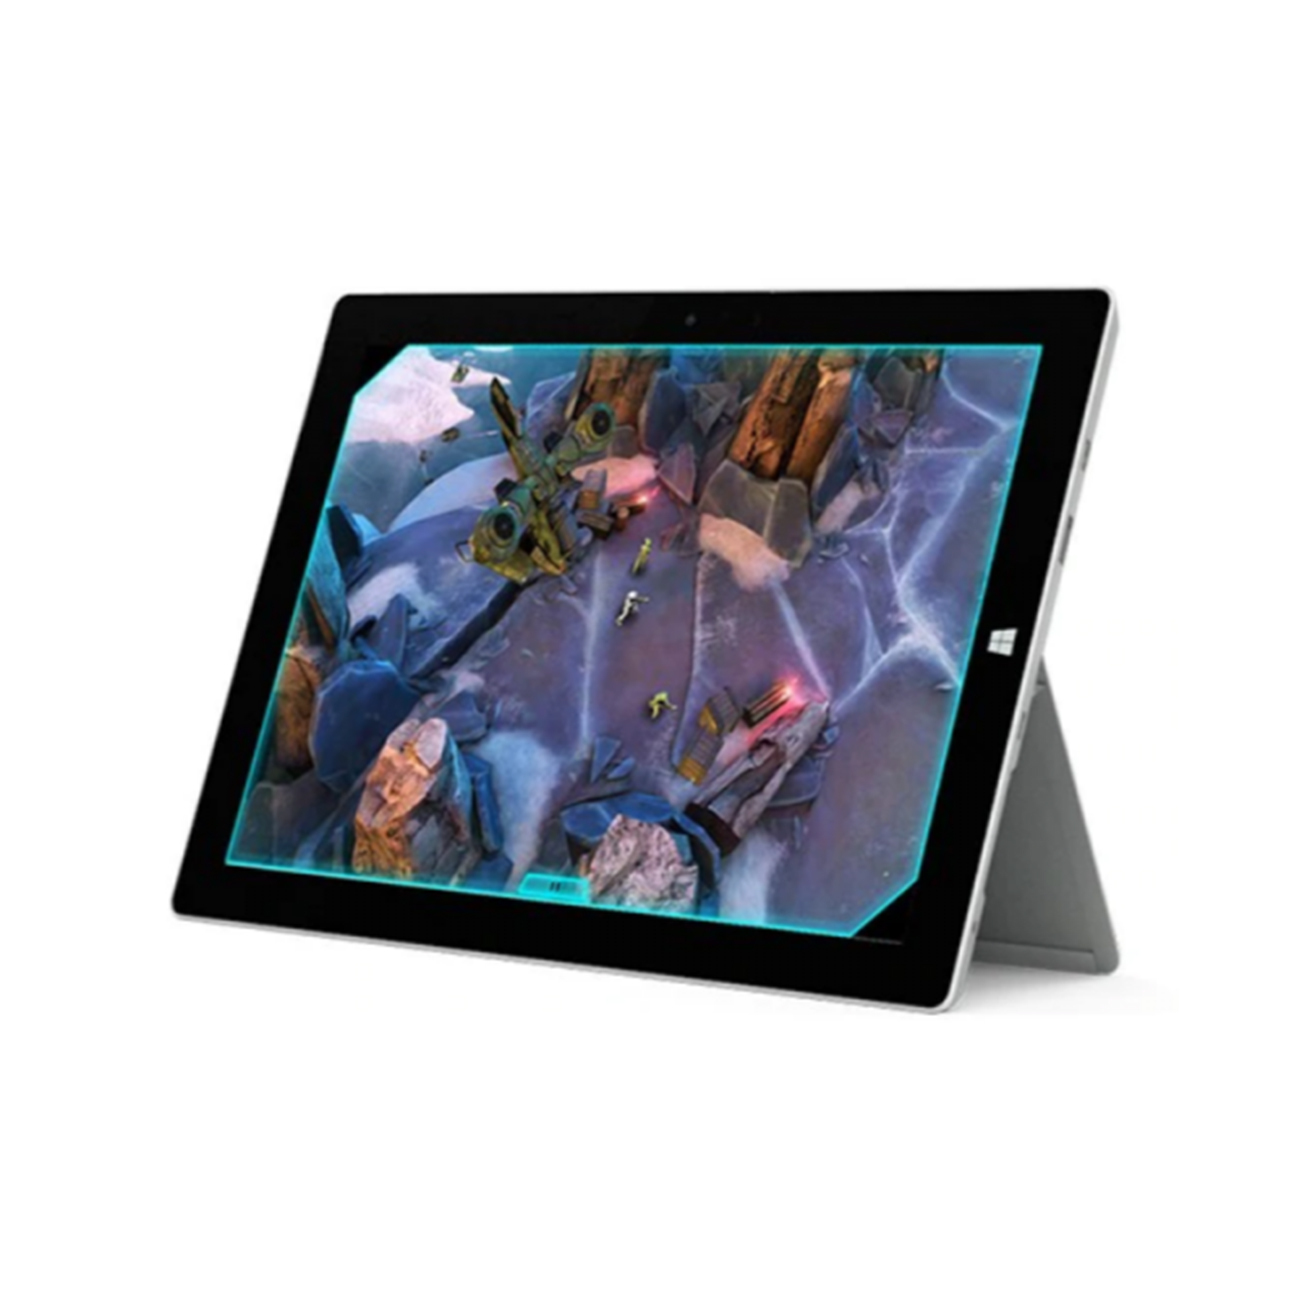 Microsoft Surface 3 As New Condition [Storage: 64GB]